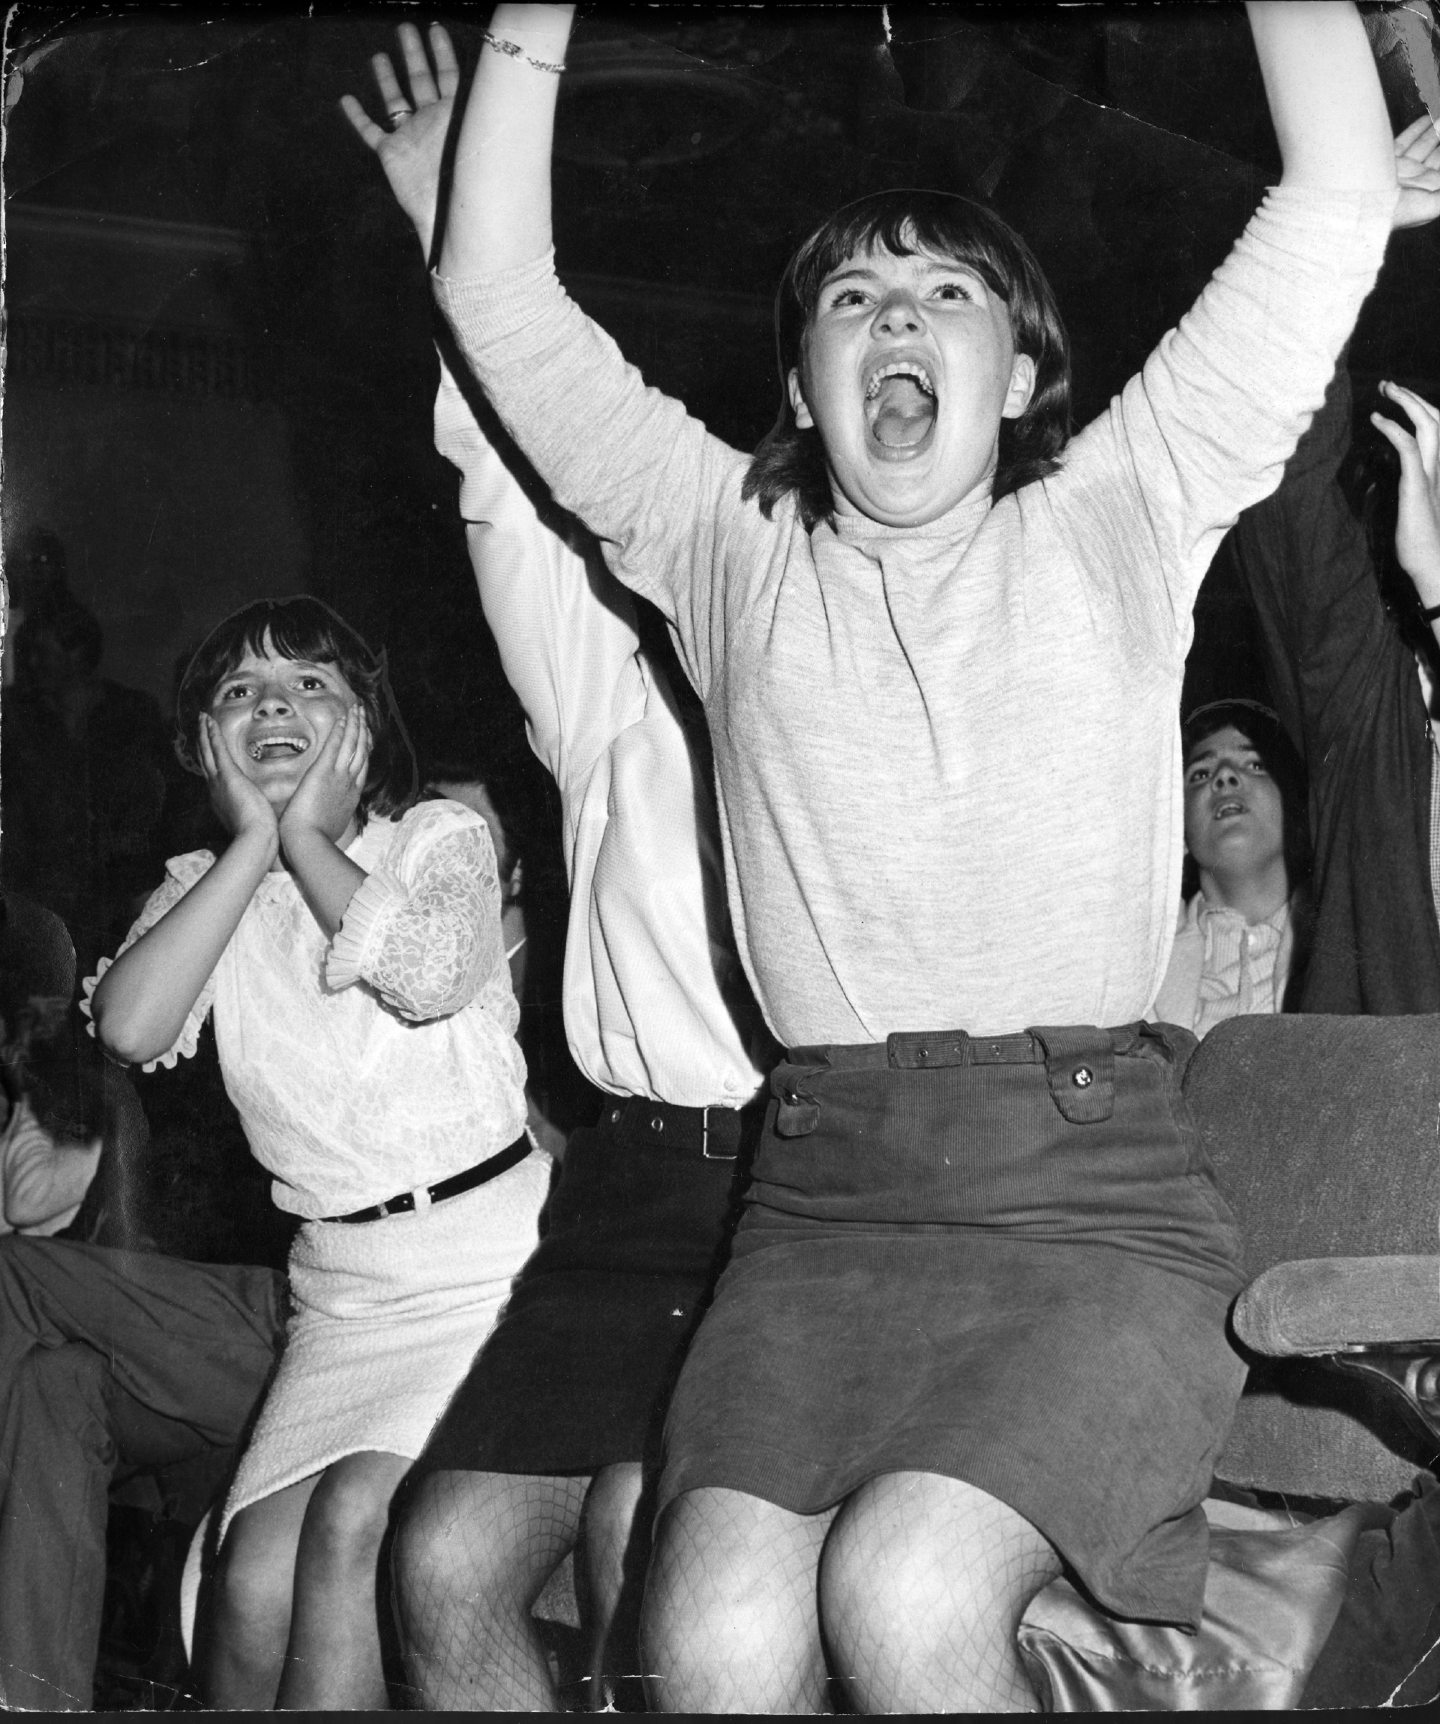 Girls leaping off seats and screaming at the Rolling Stones in June 1965.